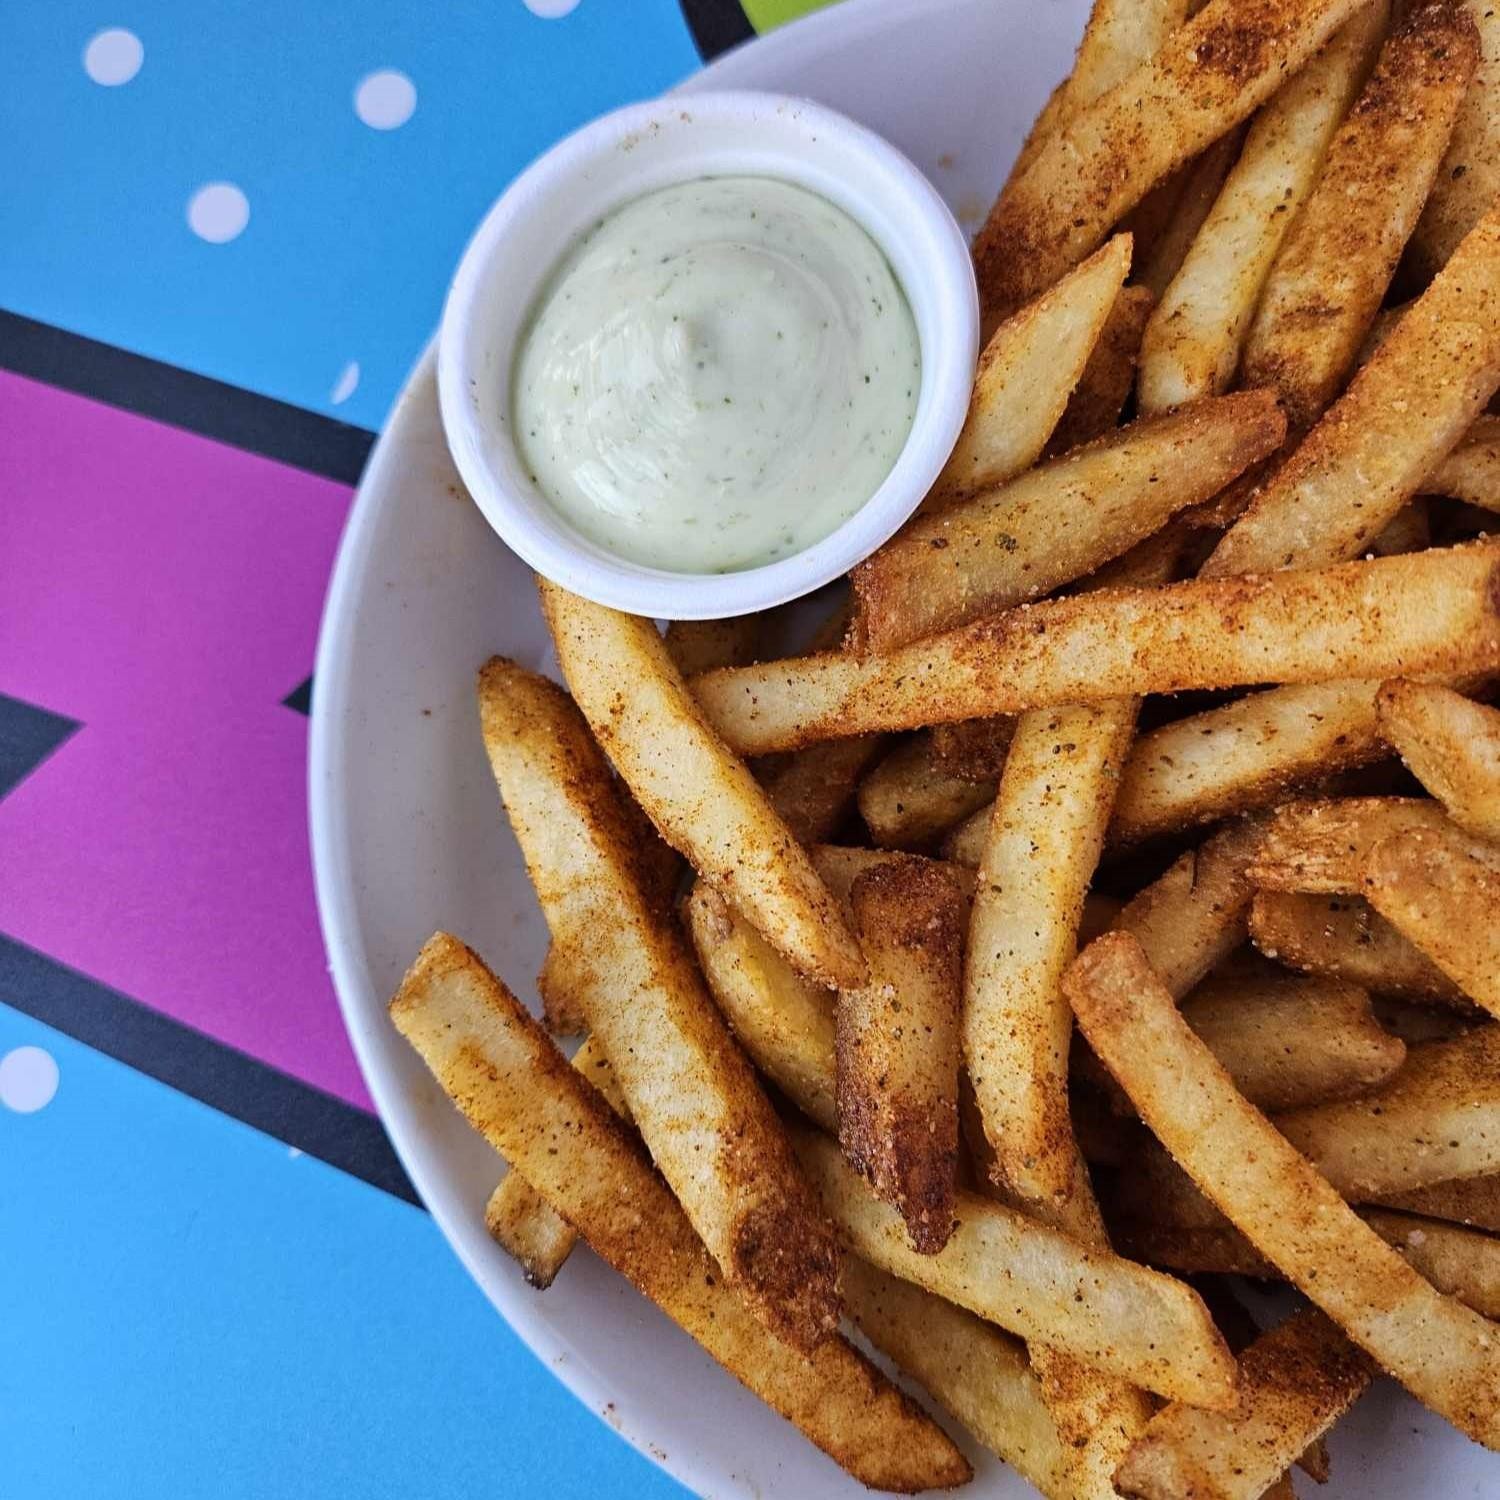 Old Bay Fries - Tossed in Old Bay, served with Pesto Aioli